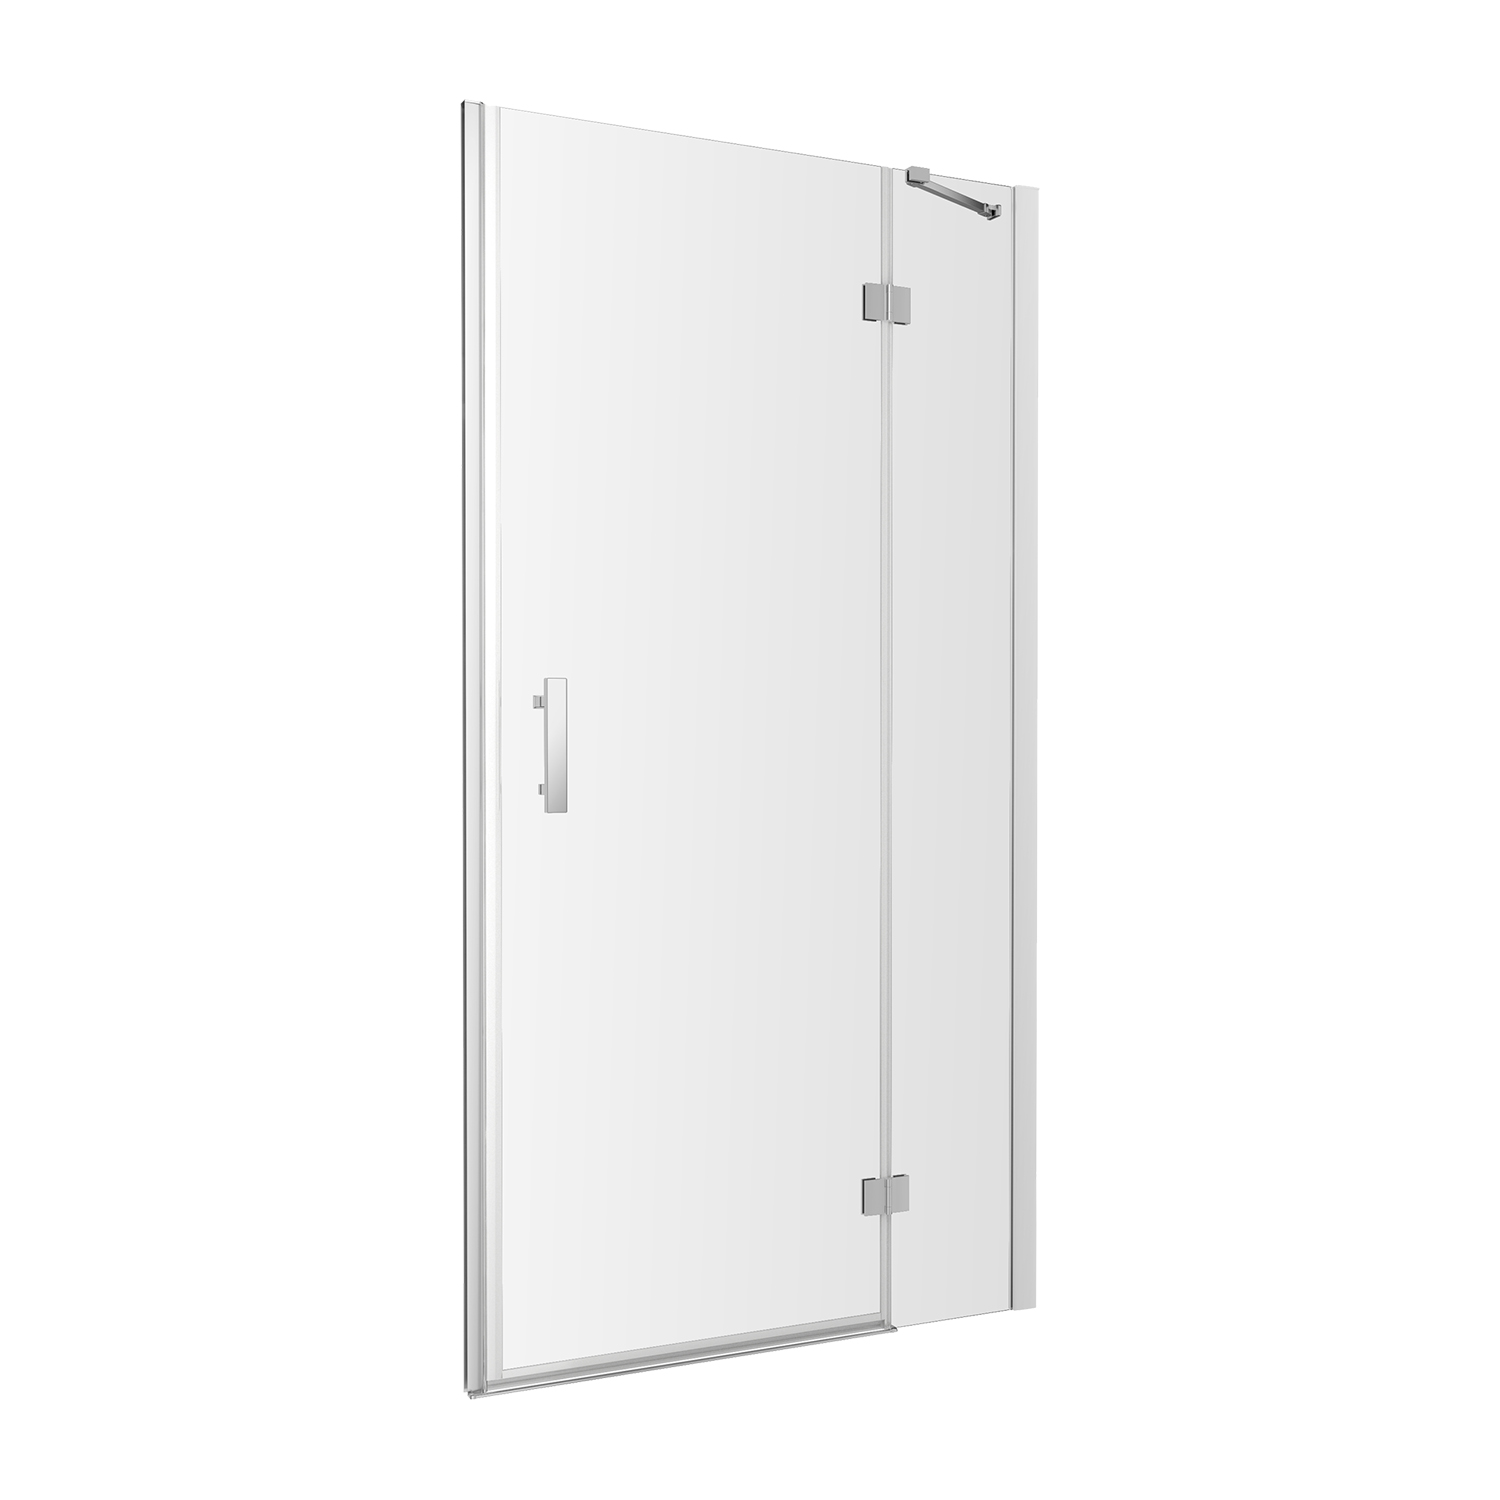 shower enclosure element: side wall with door, 80 cm